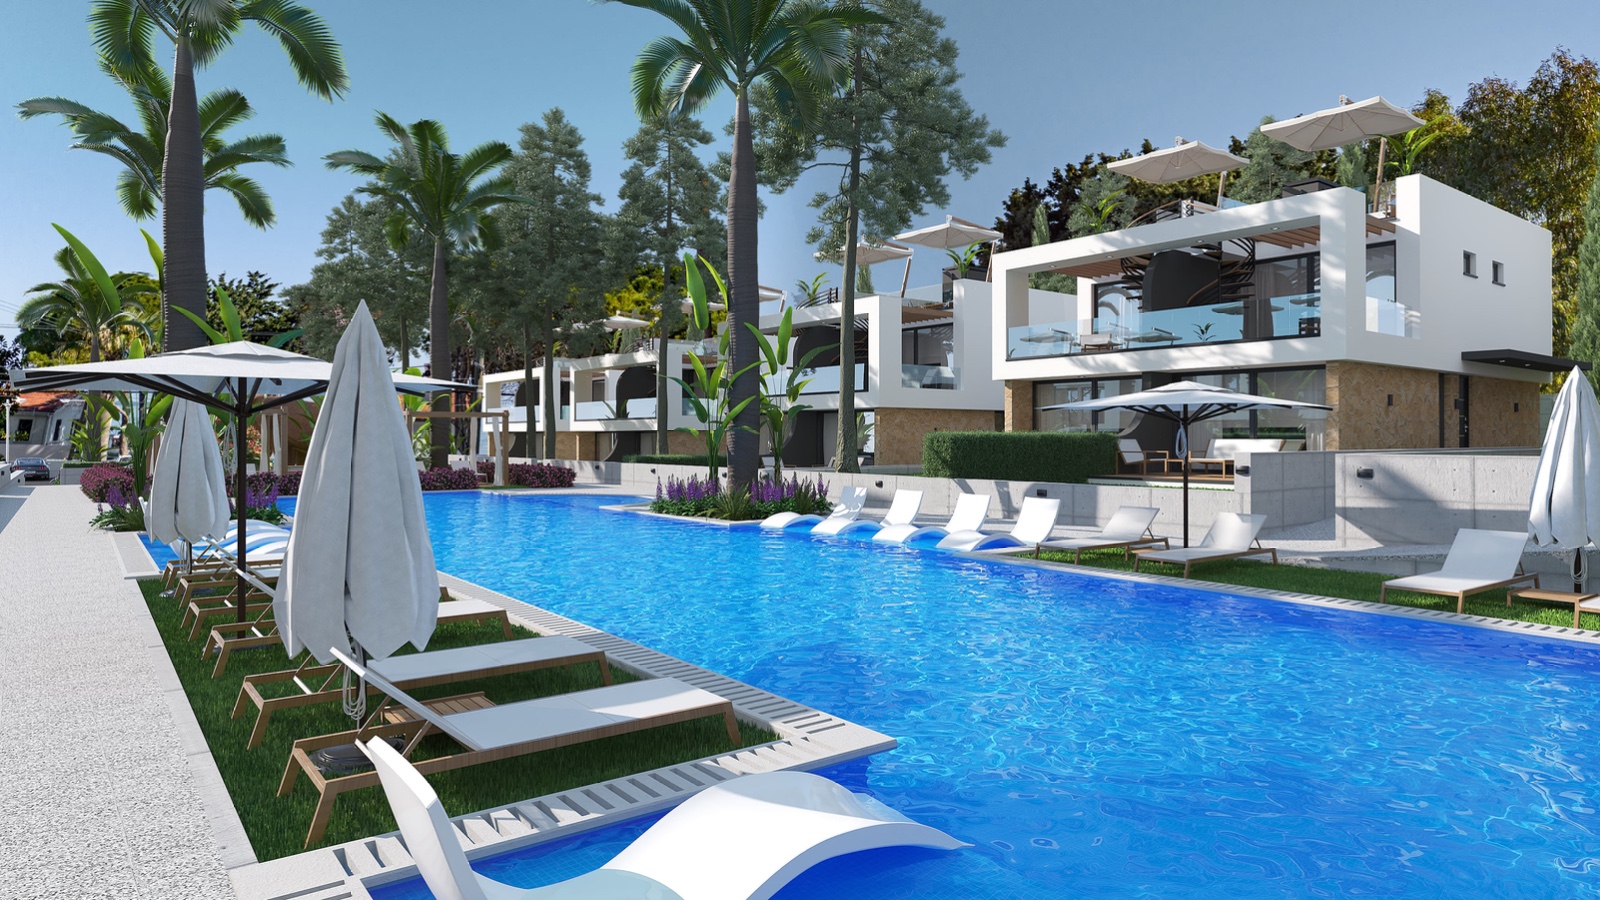 Exquisite Two Bedroom Semi-detached Villas with Unique Concept 100m from the Sea priced from £420,000